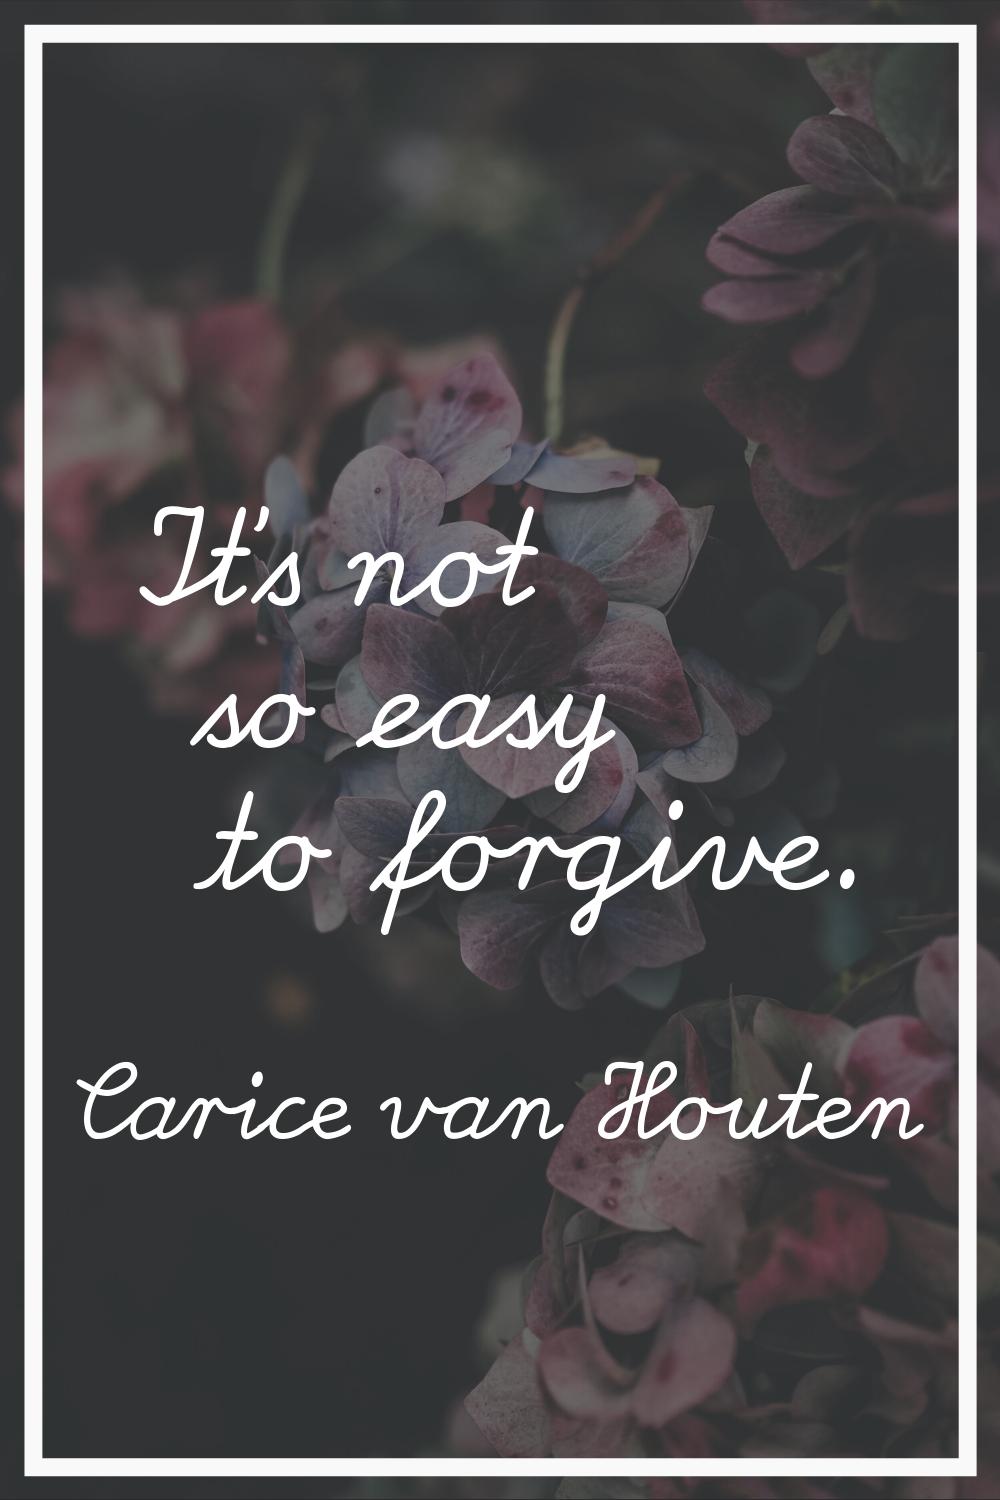 It's not so easy to forgive.